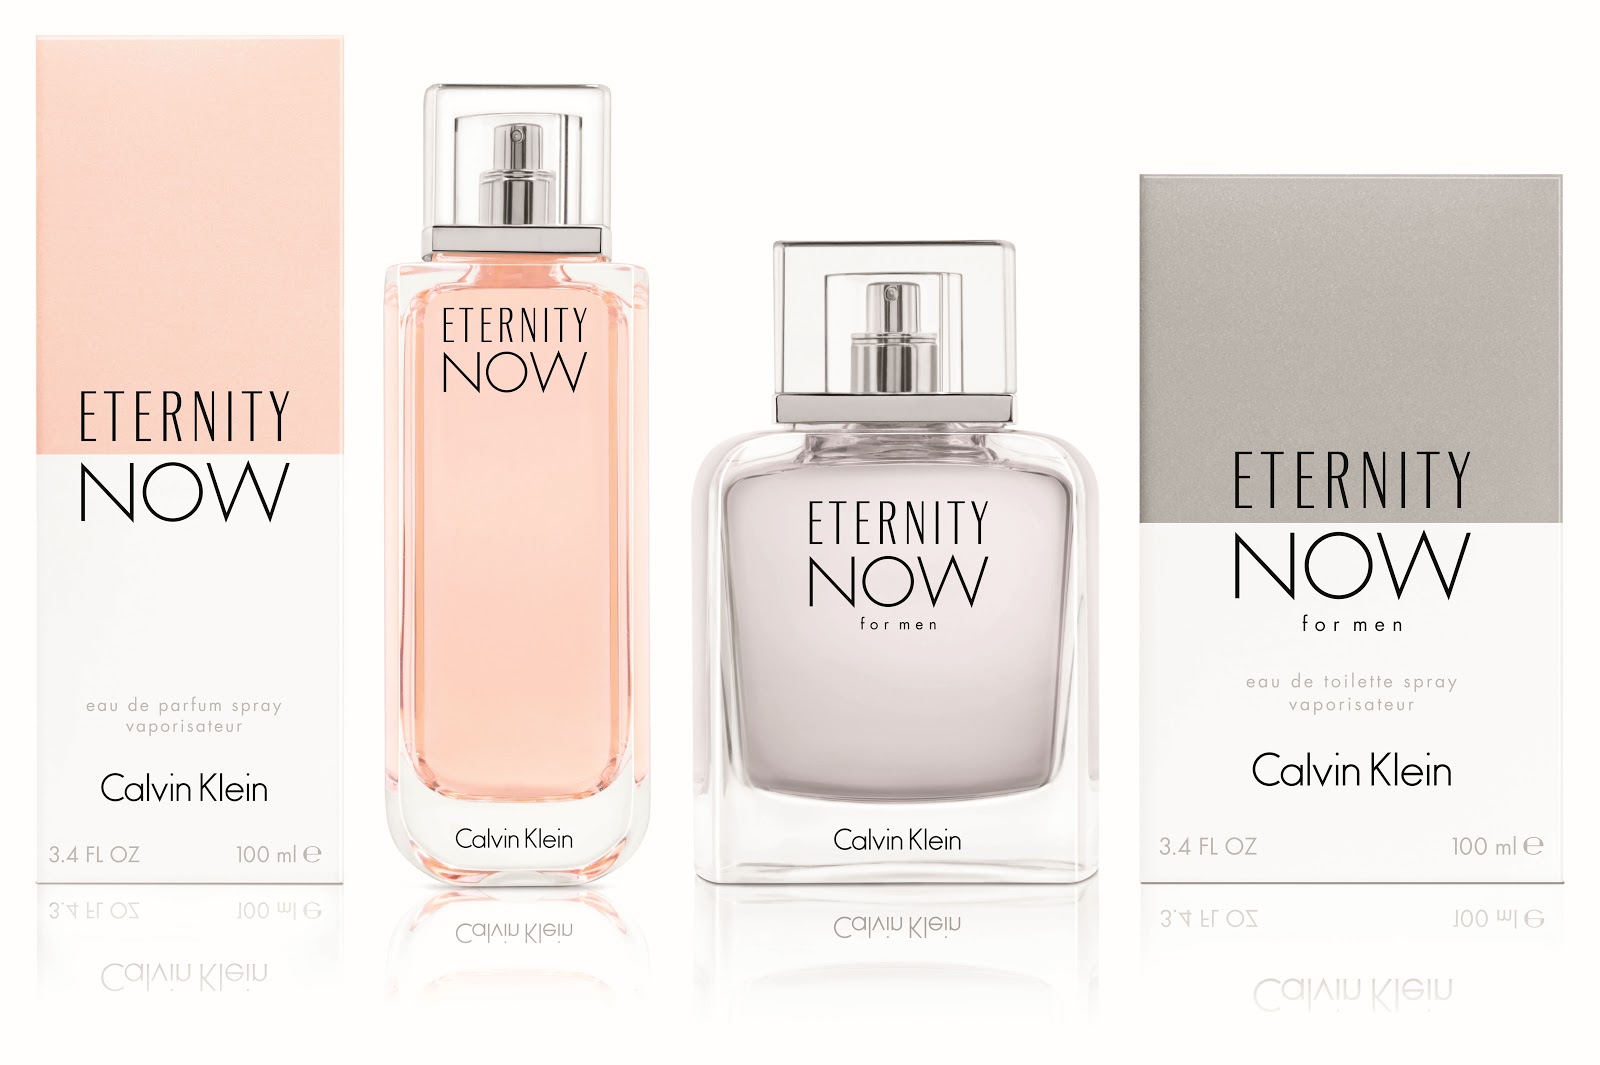 Calvin Klein Eternity Now Perfumes India| Cherry On Top Blog| Indian Beauty, Fashion and Lifestyle Blog